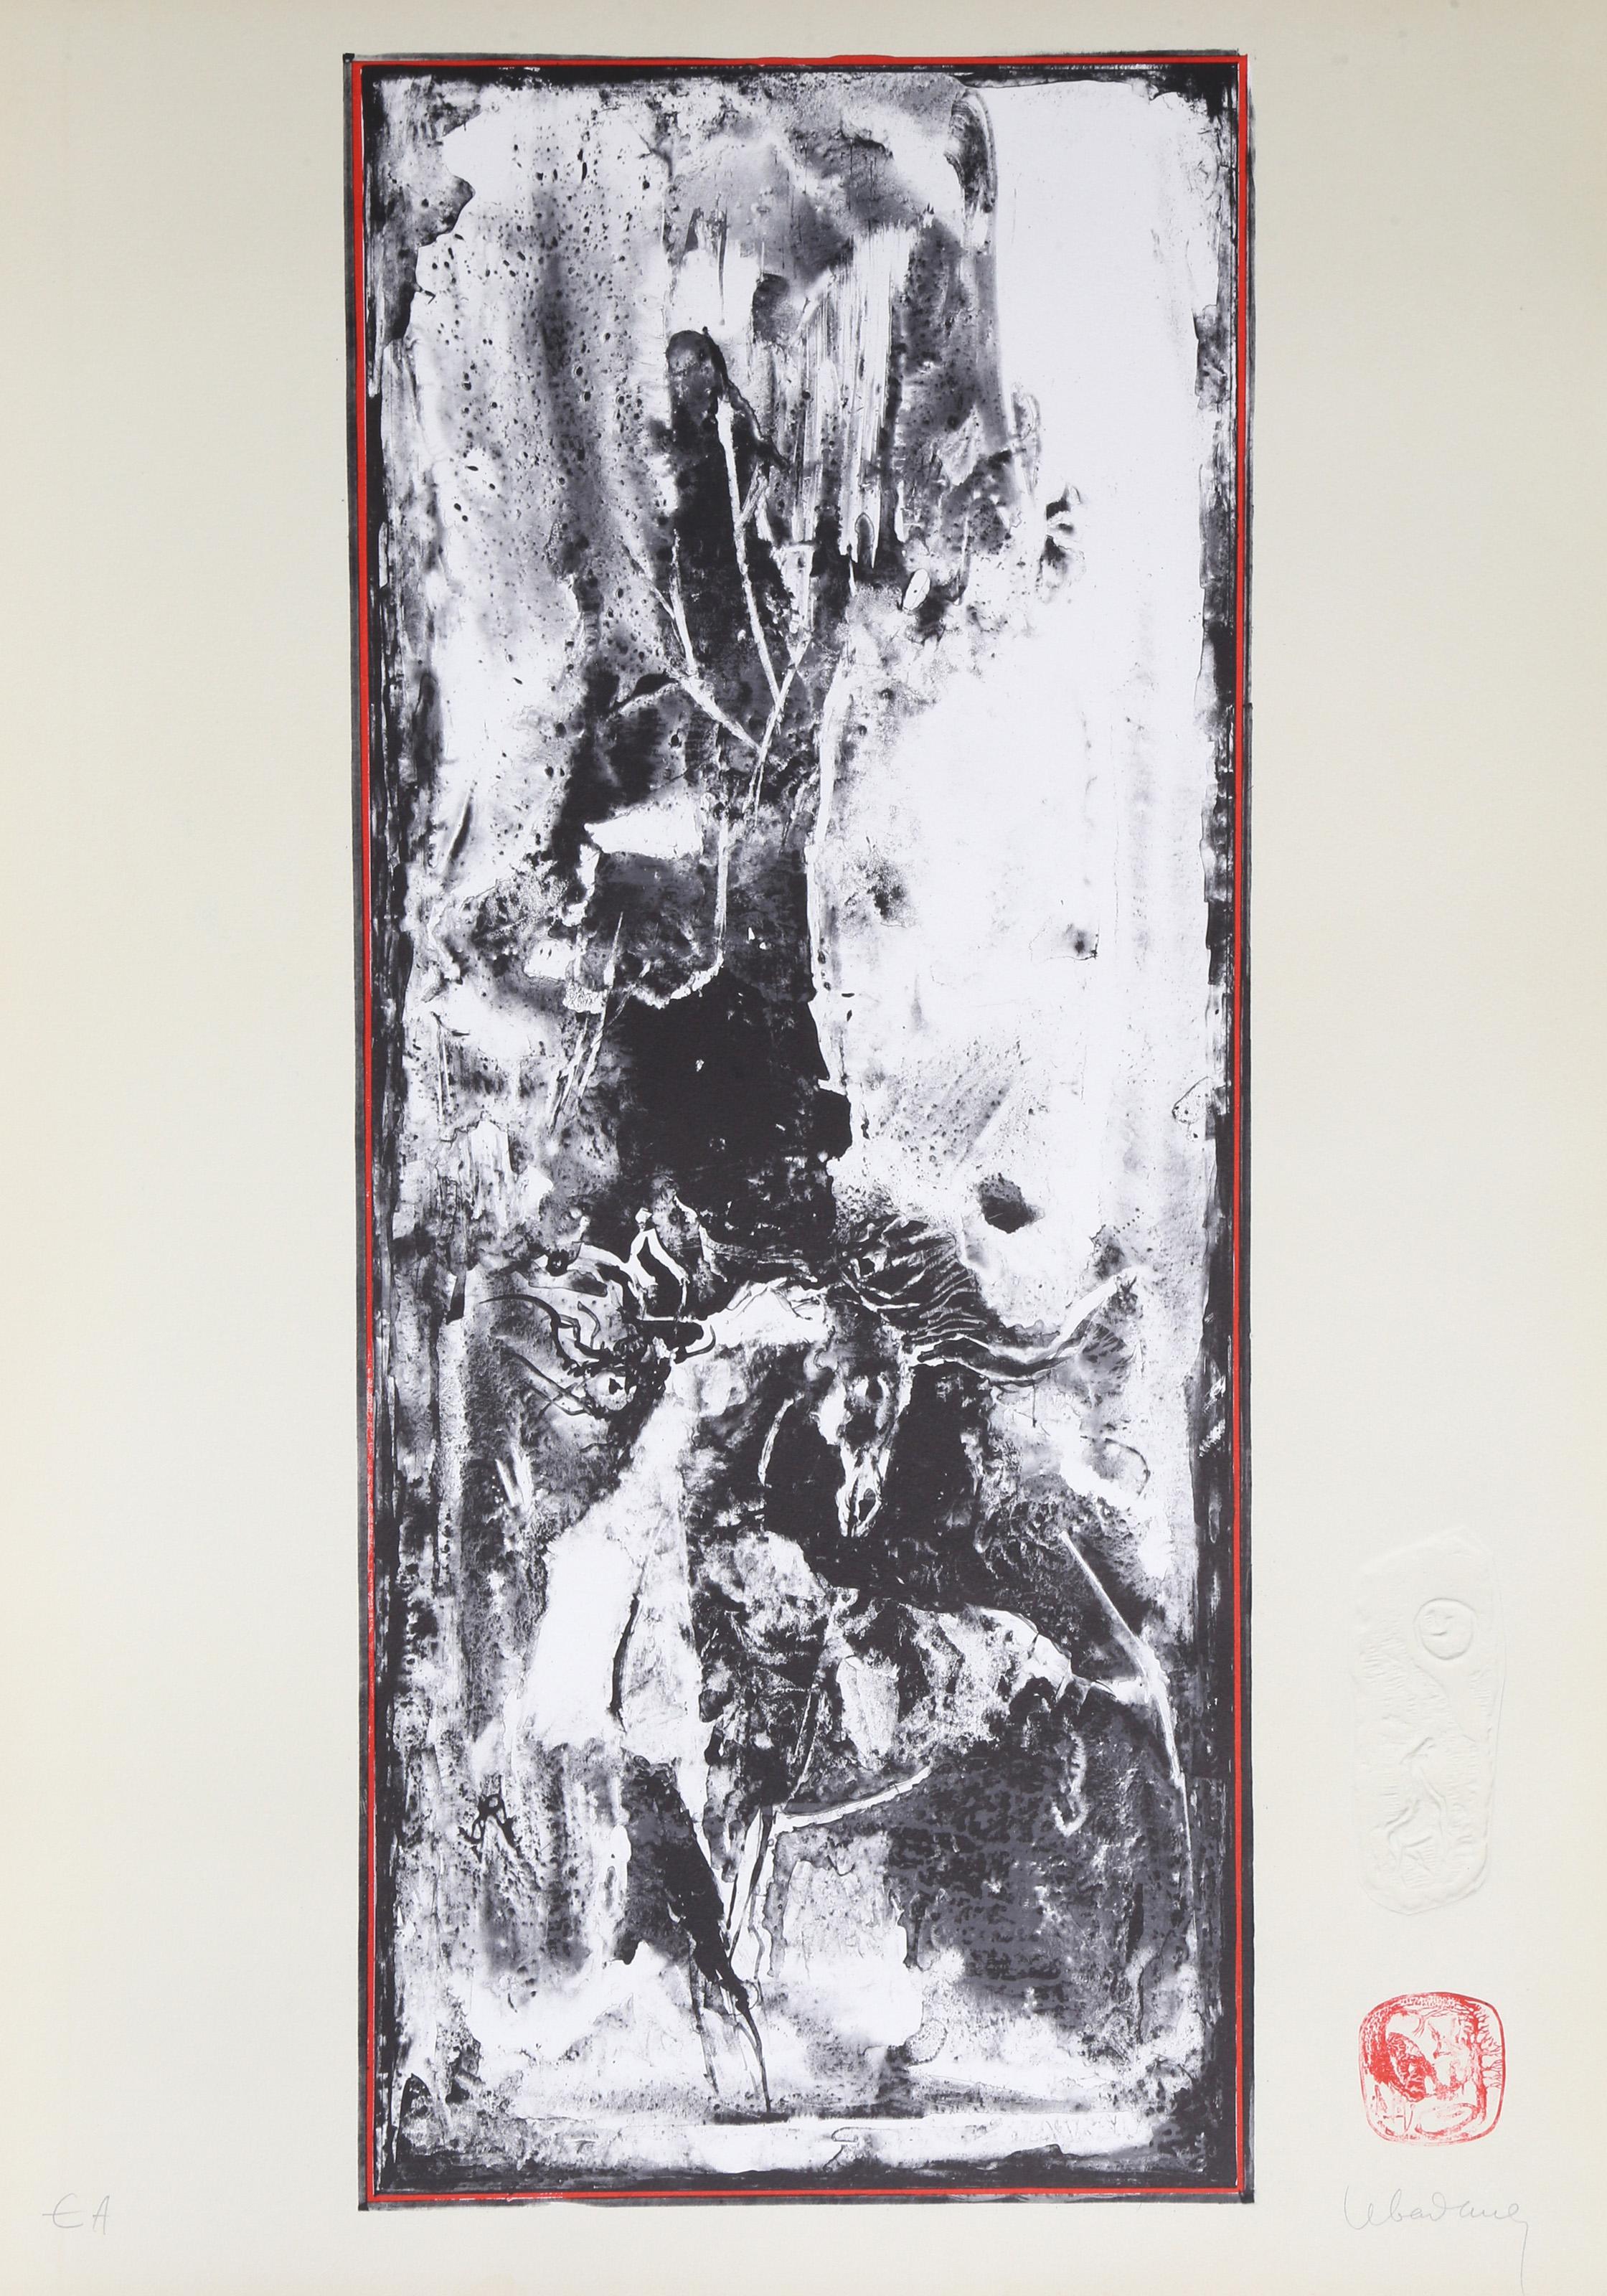 Lebadang (aka Hoi), Vietnamese (1922 - 2015) -  8 from the 10 Horses portfolio. Year: 1974, Medium: Lithograph with Embossing, signed in pencil, Edition: EA, Size: 30 x 21 in. (76 x 53 cm) 